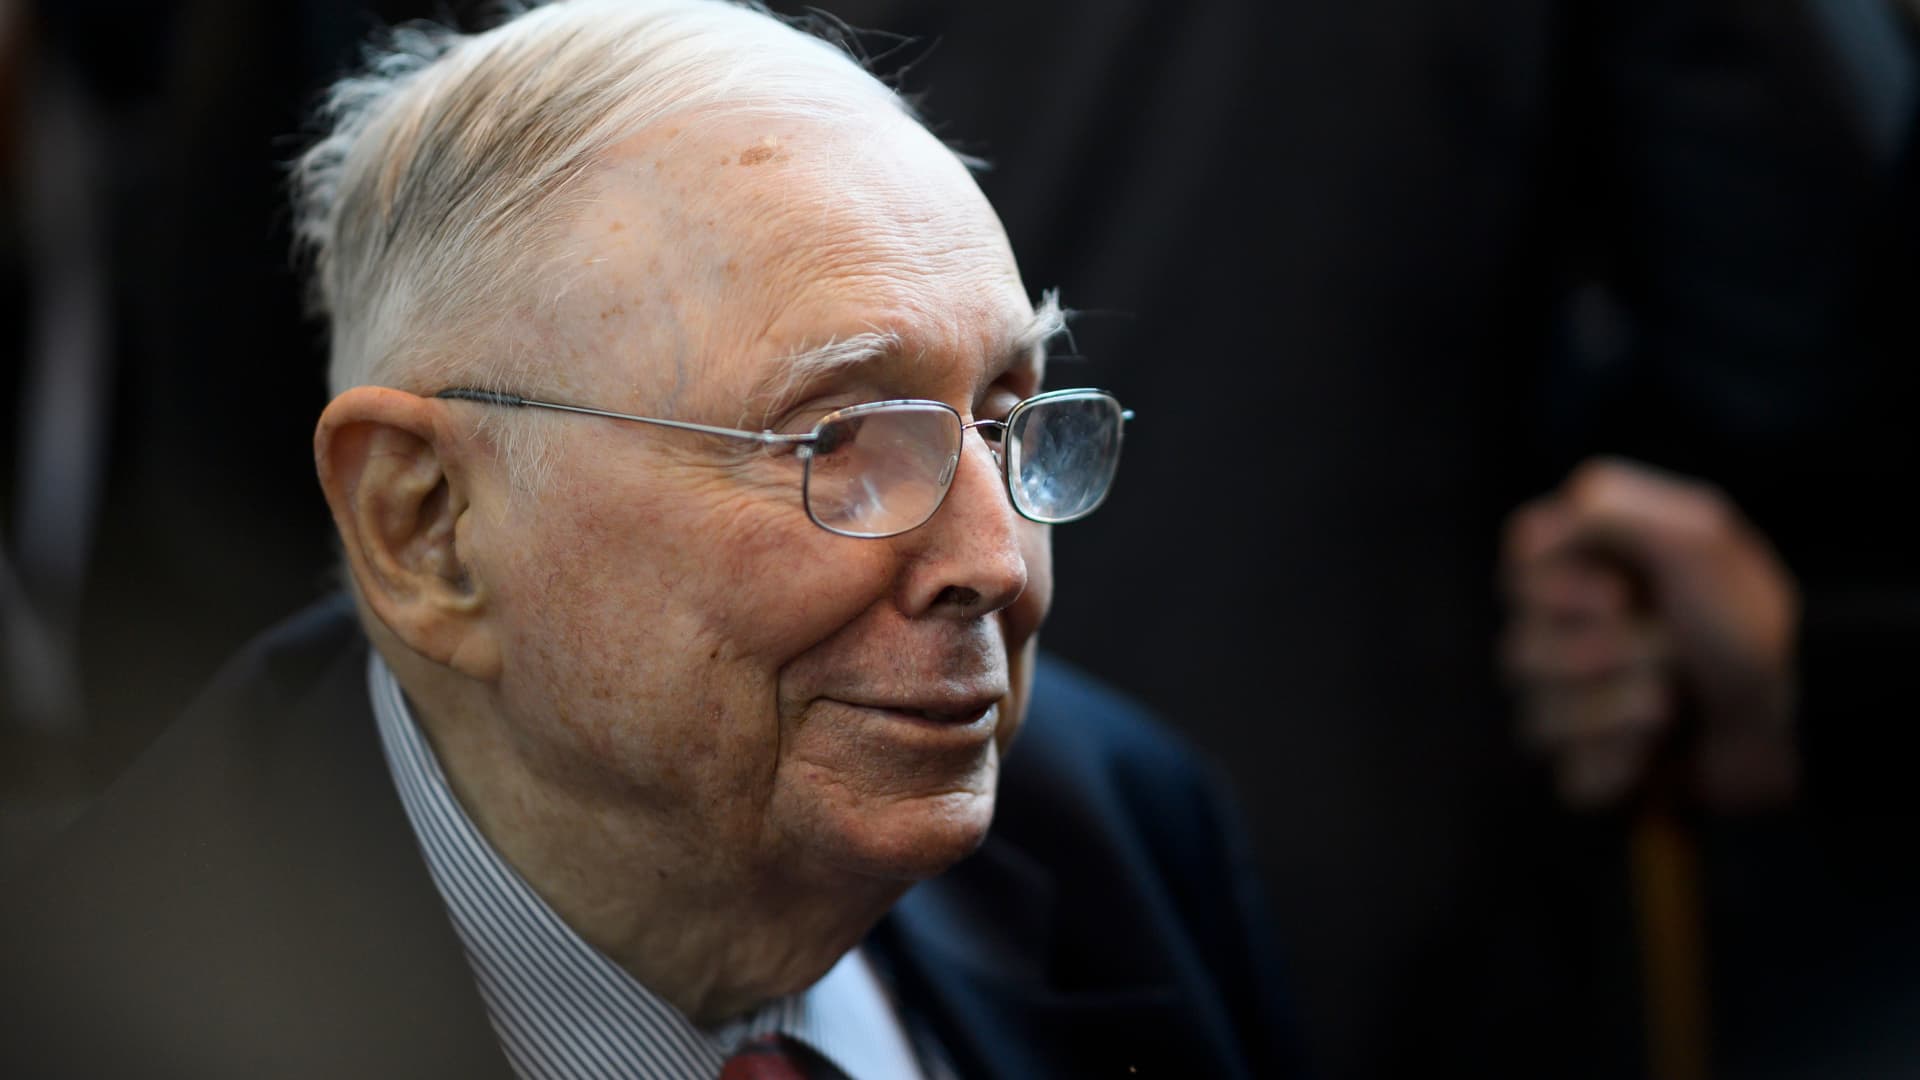 Charlie Munger said there was no secret to his success: 'I avoided the standard ways of failing'